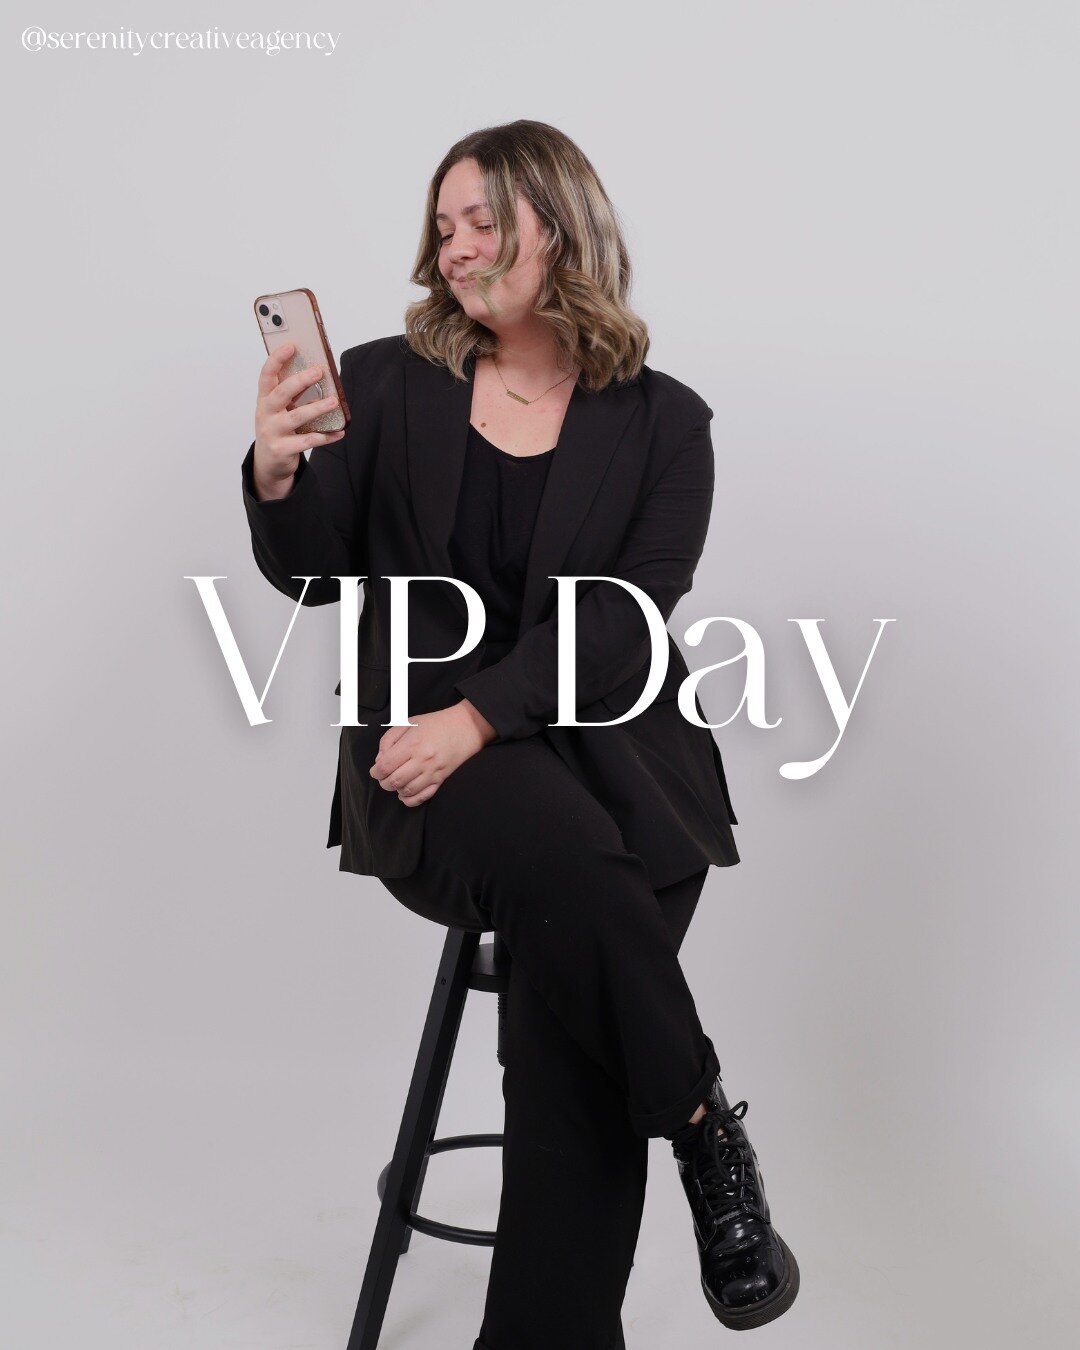 HELLO VIP! 🤩🖤

If you&rsquo;ve been putting off that website update, or could use a batch of engaging and branded content for your socials, mark your calendars because THIS FRIDAY you will be able to book one of our upcoming VIP Days! ✨

With 3 cur